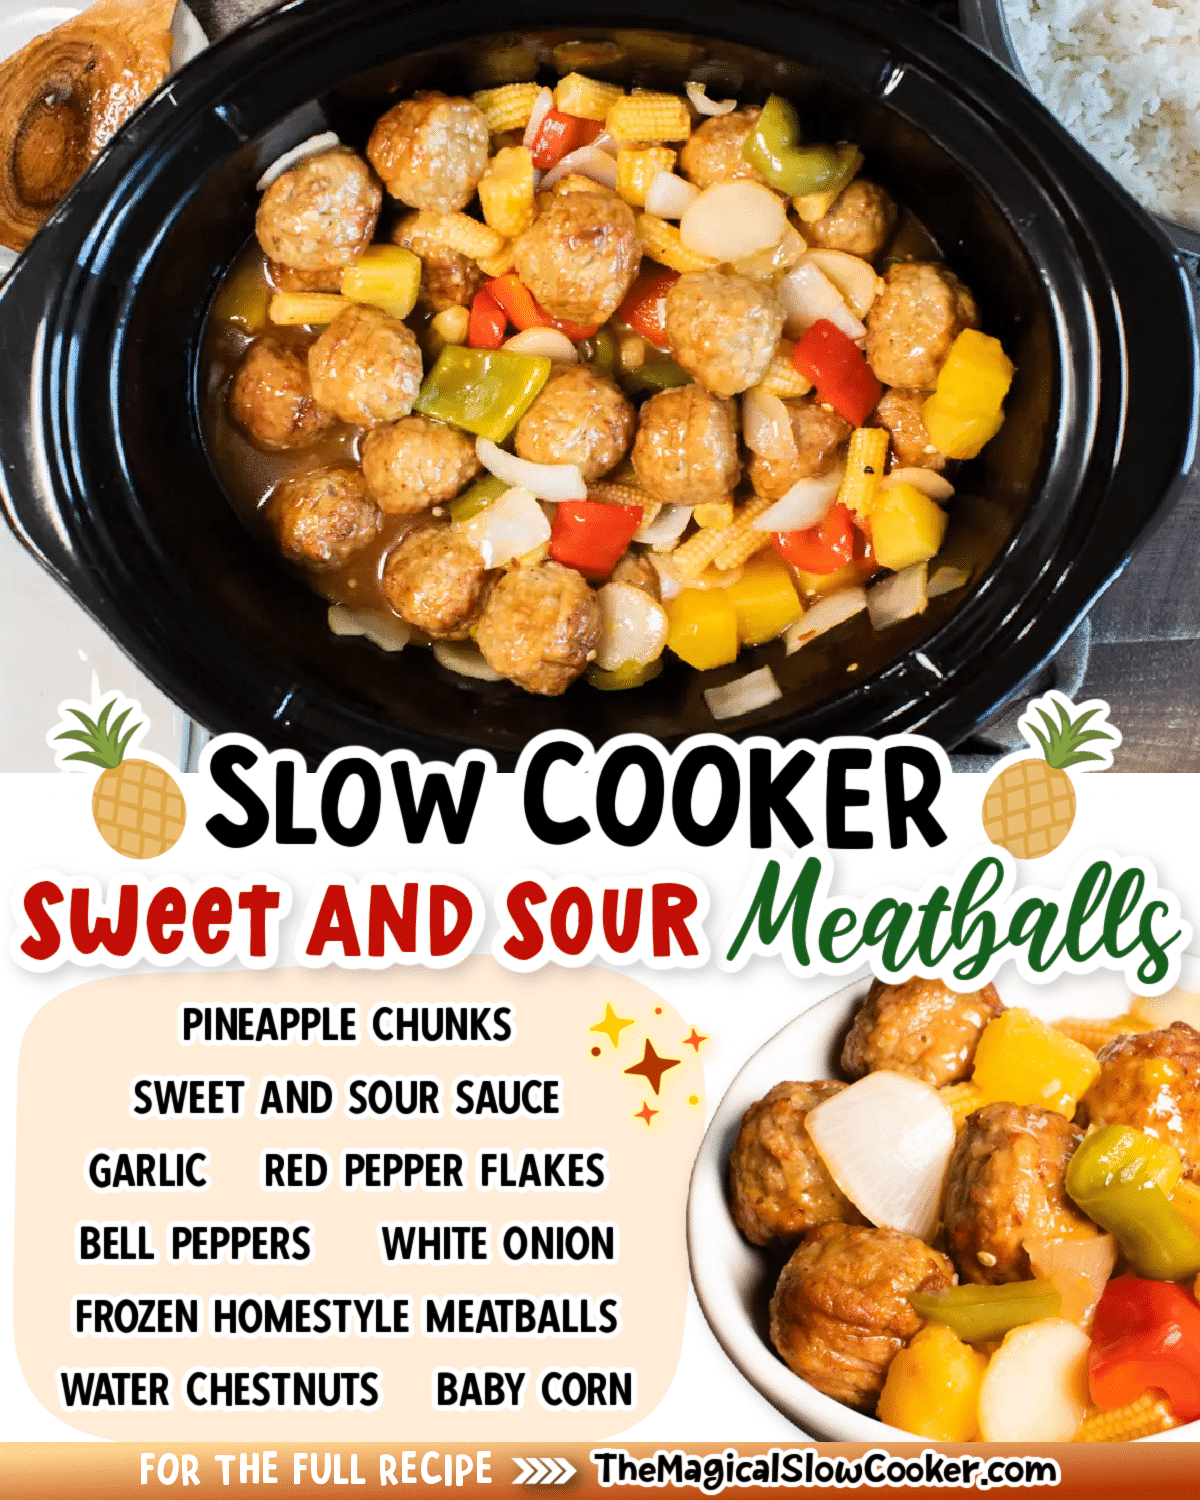 Sweet and sour meatballs images with text of what the ingredients are.